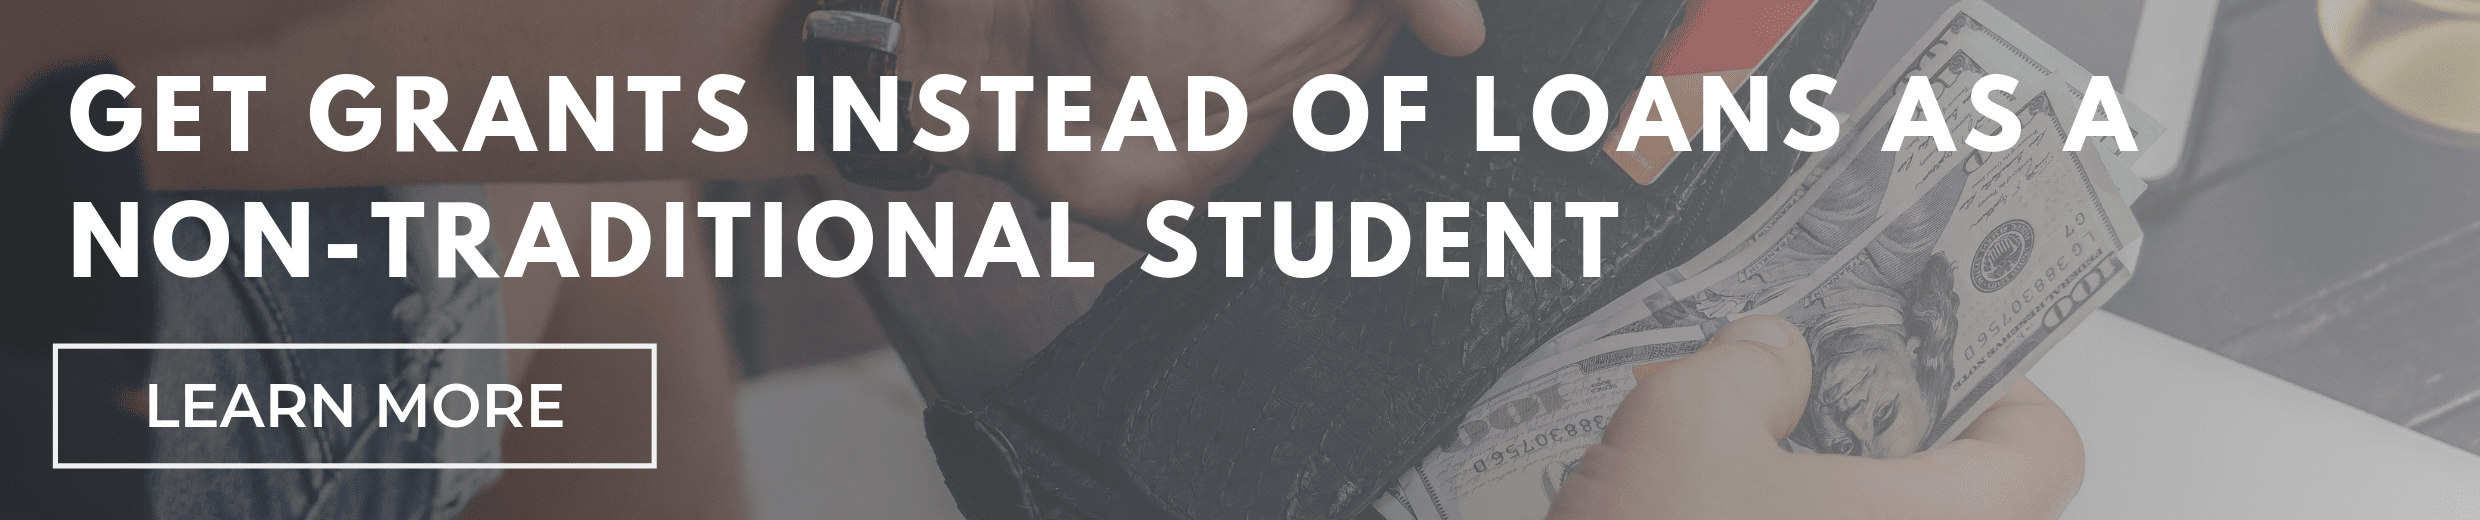 Where to Get Grants Instead of Loans as a Non-Traditional Student